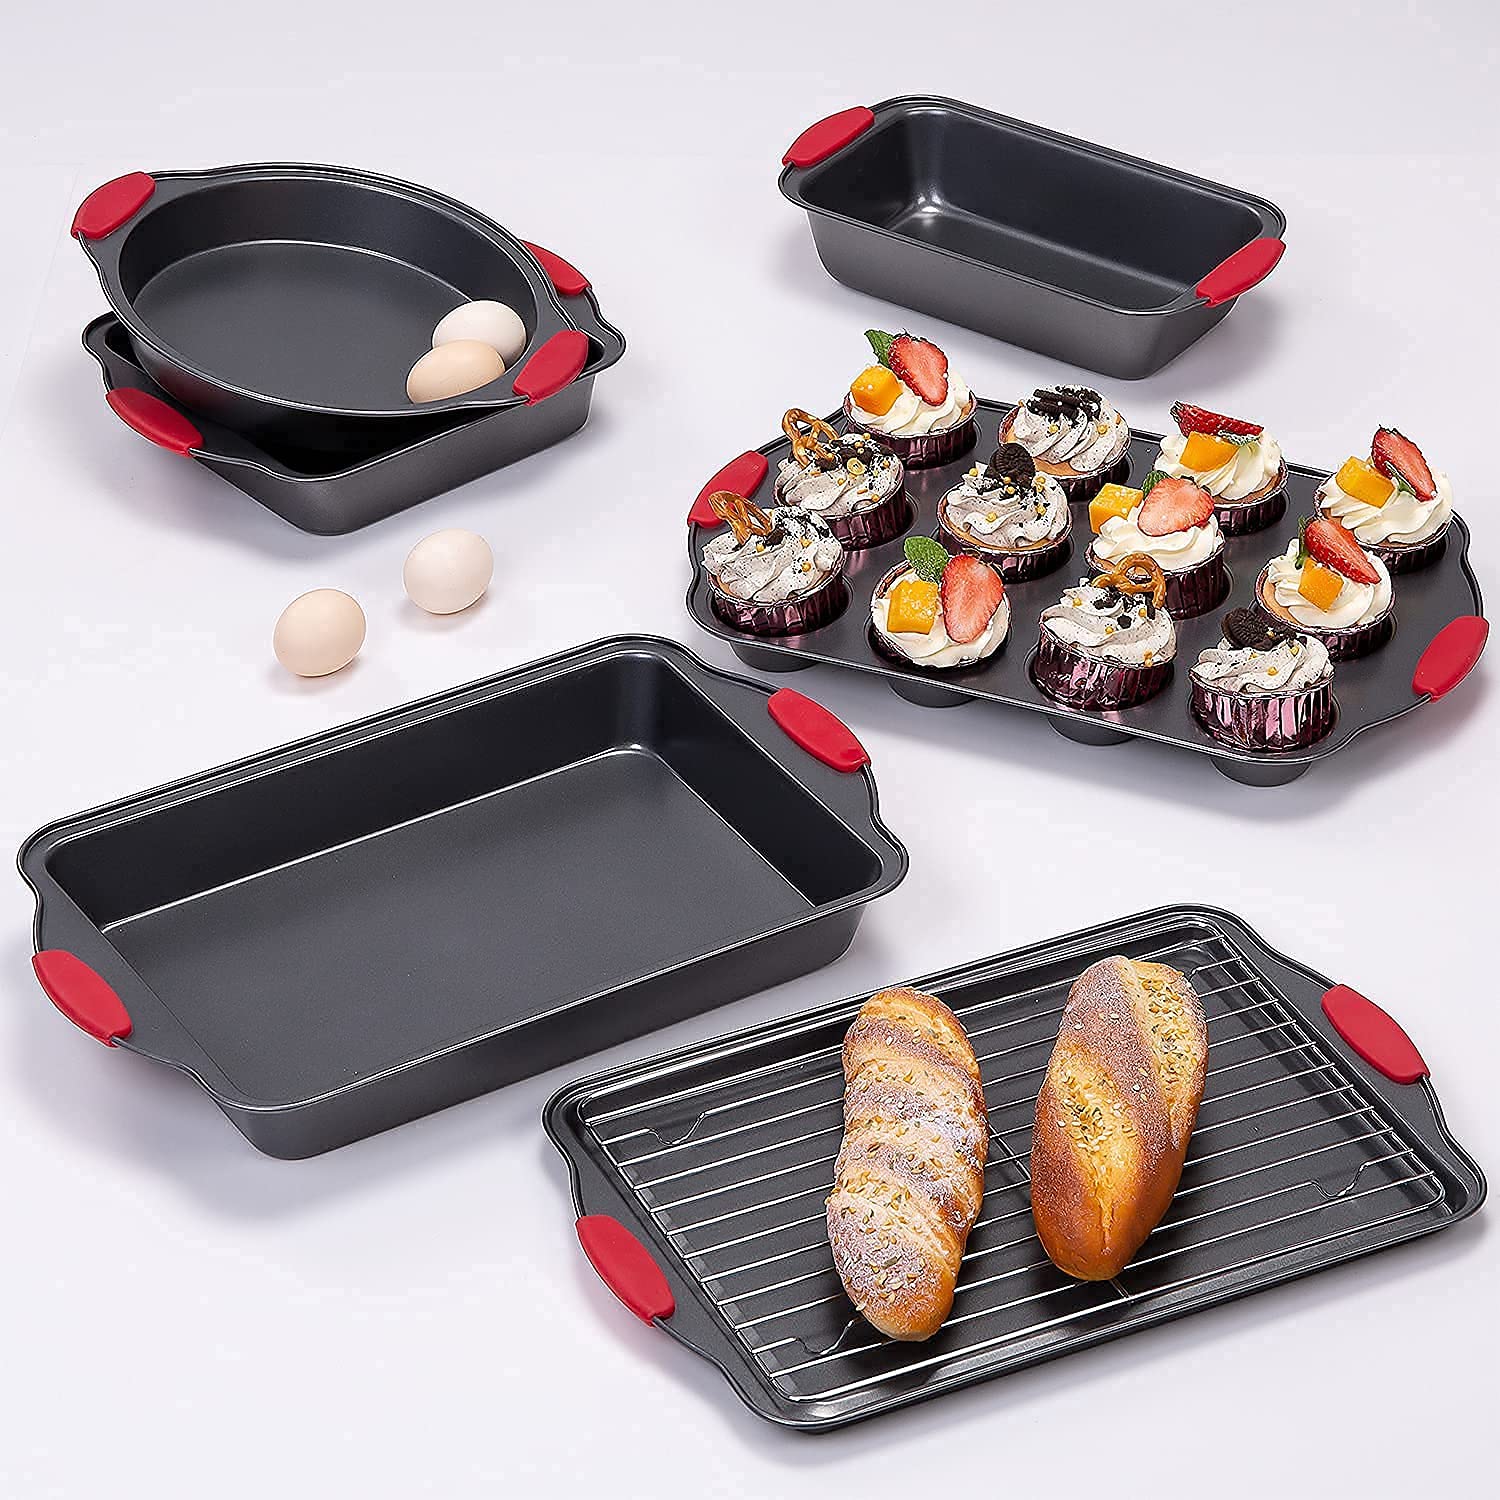 Nuovoo Baking Sheets for Oven, 7 Piece Cake Pans Sets Nonstick for Baking, Carbon Steel Bakeware Sets with Red Silicone Handles, Dark Grey, Baking Supplies for Donut Loaf Cupcake Biscuit Bread